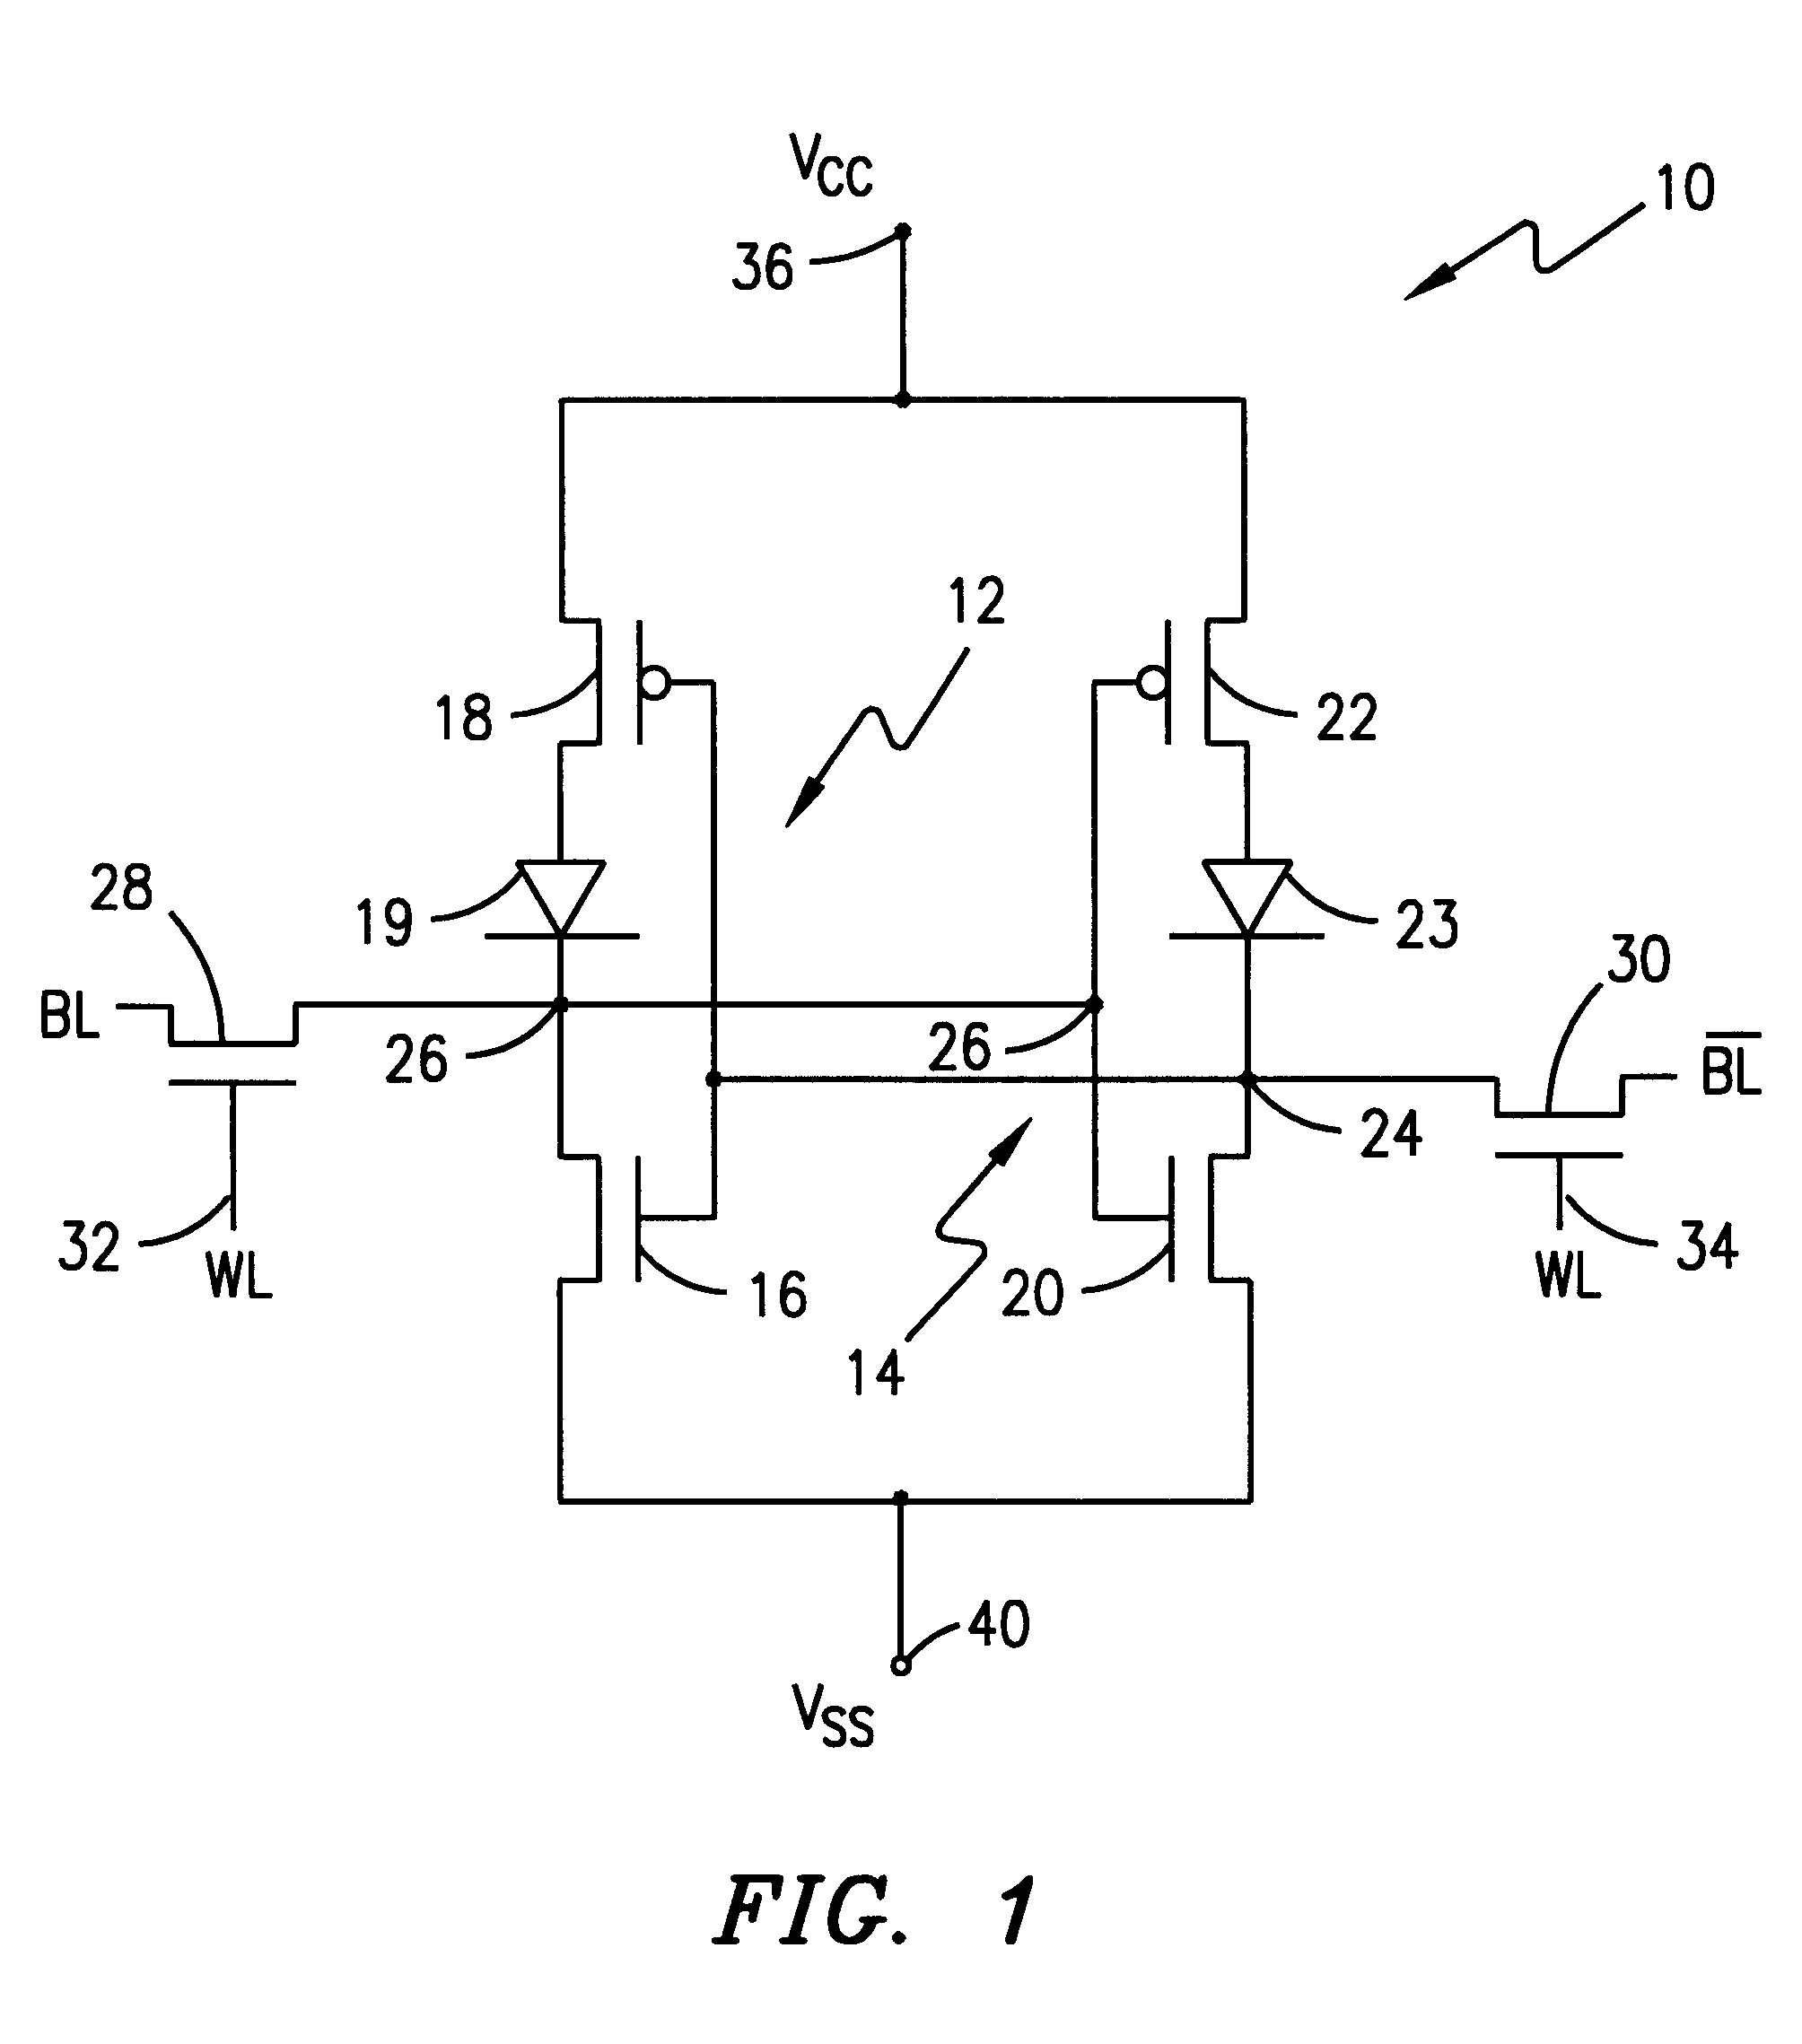 Method of making an SRAM cell and structure